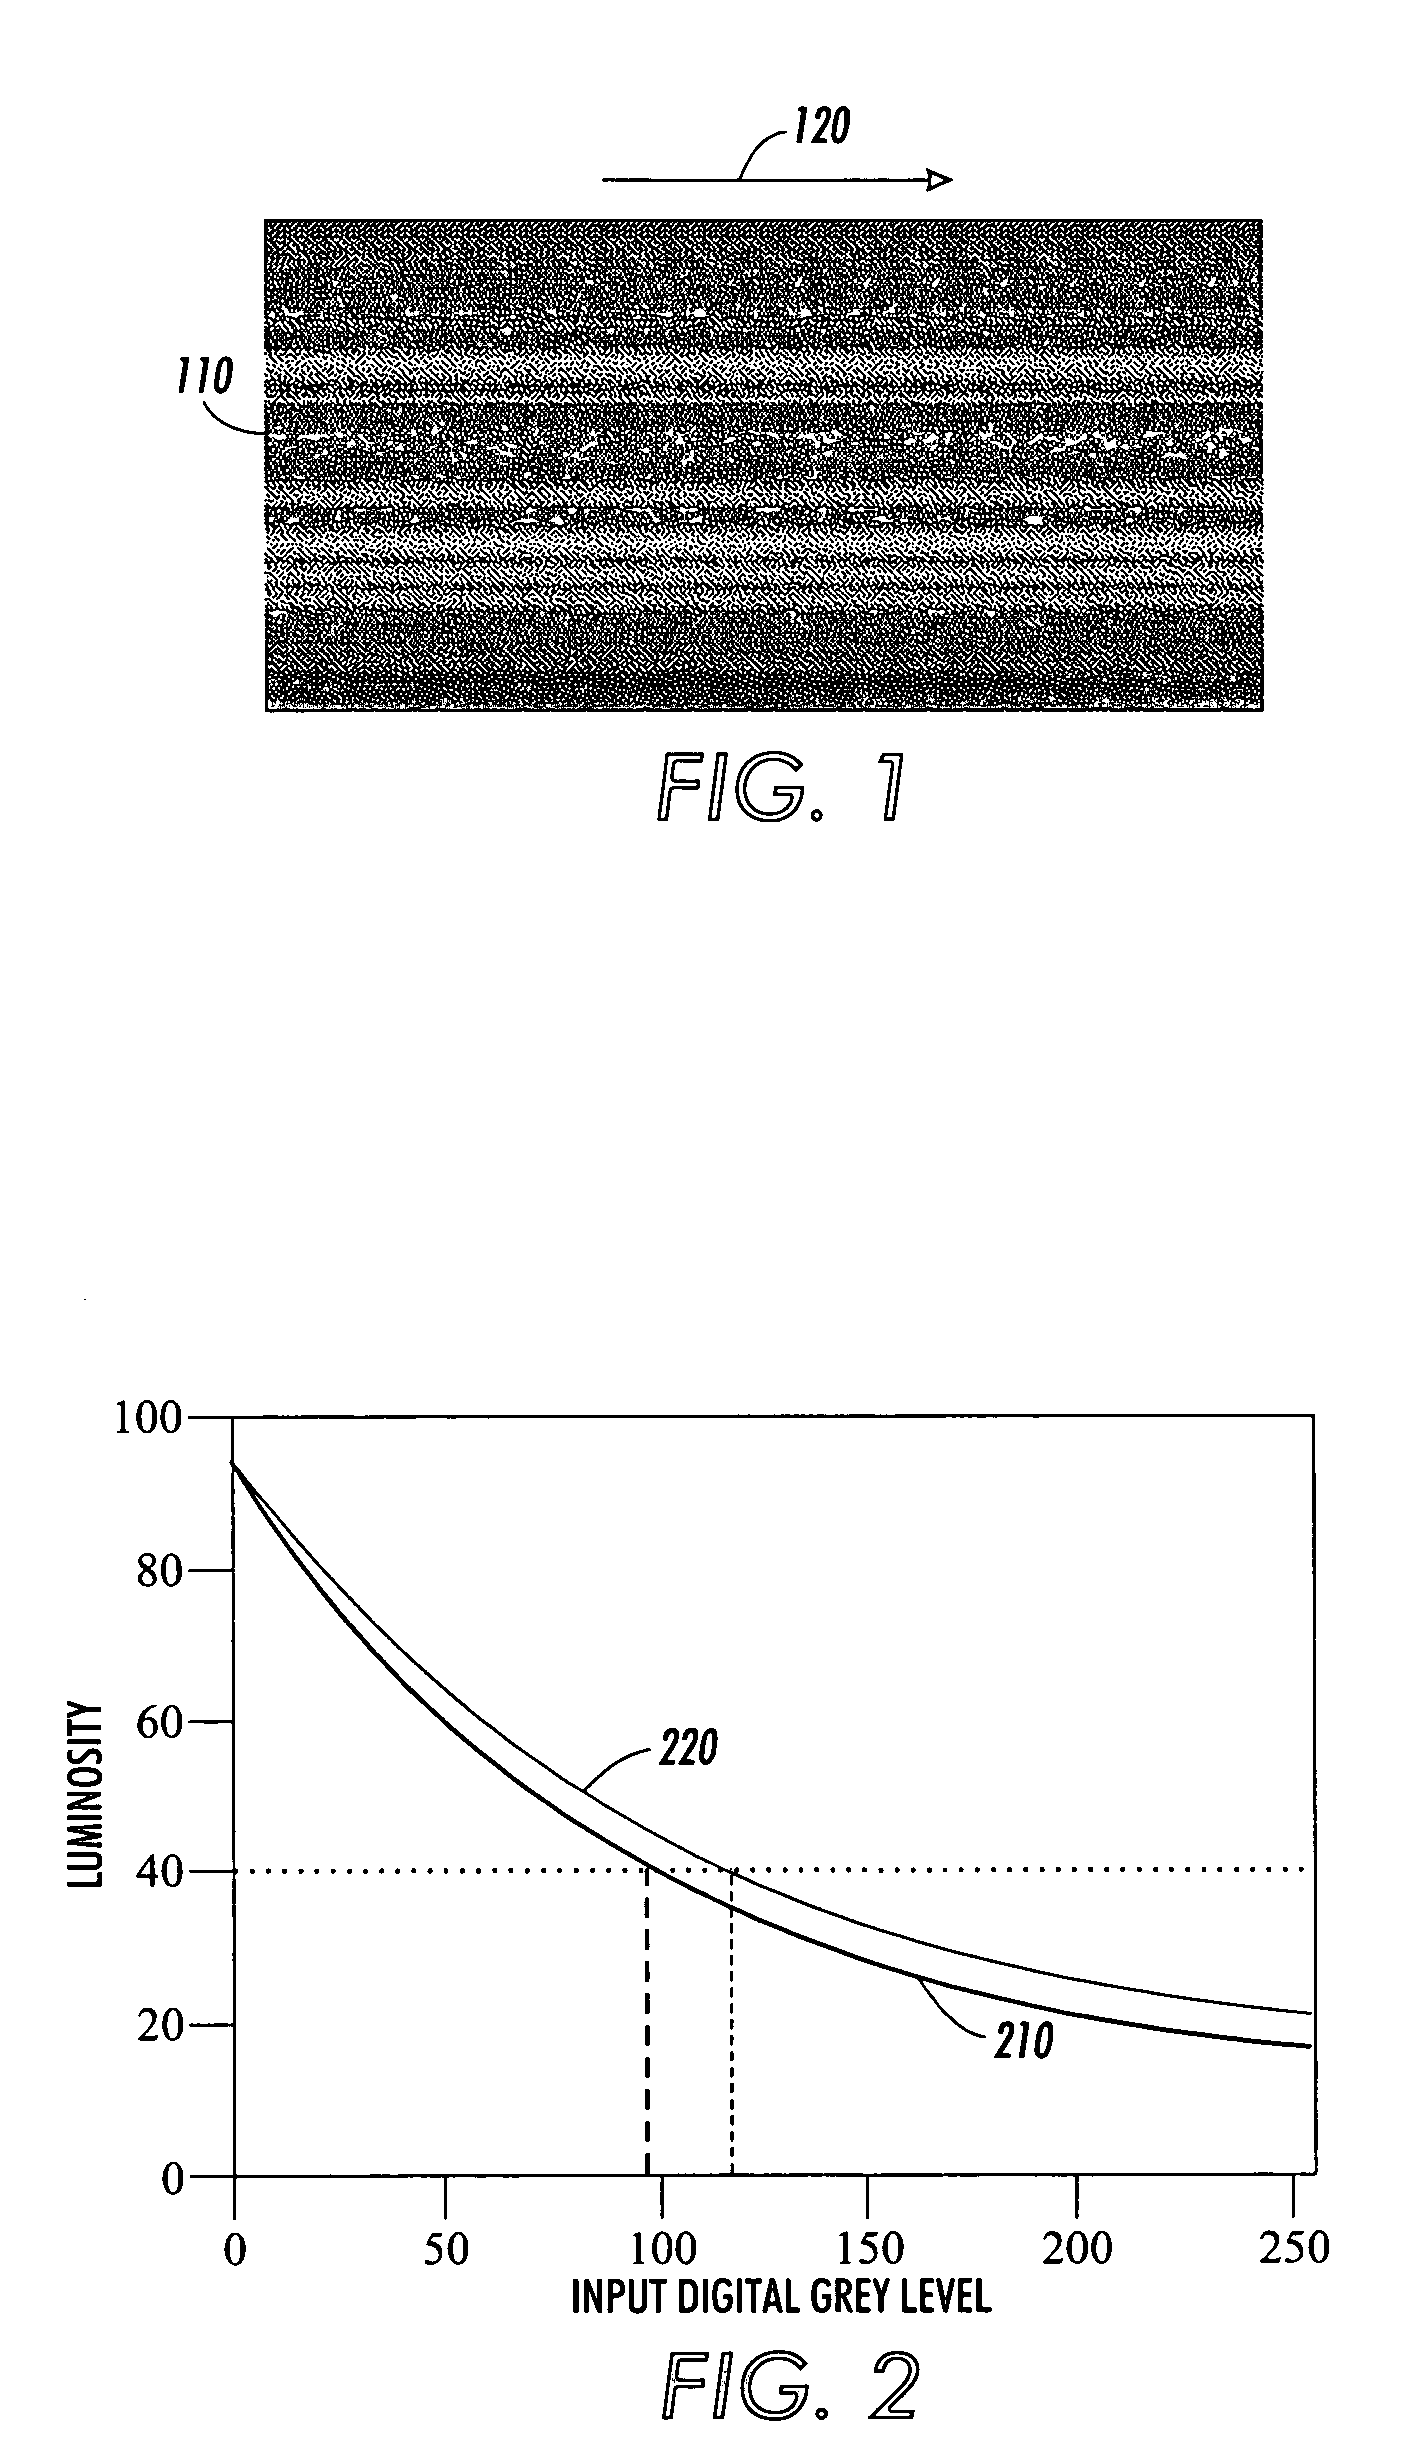 System and methods for compensating for streaks in images